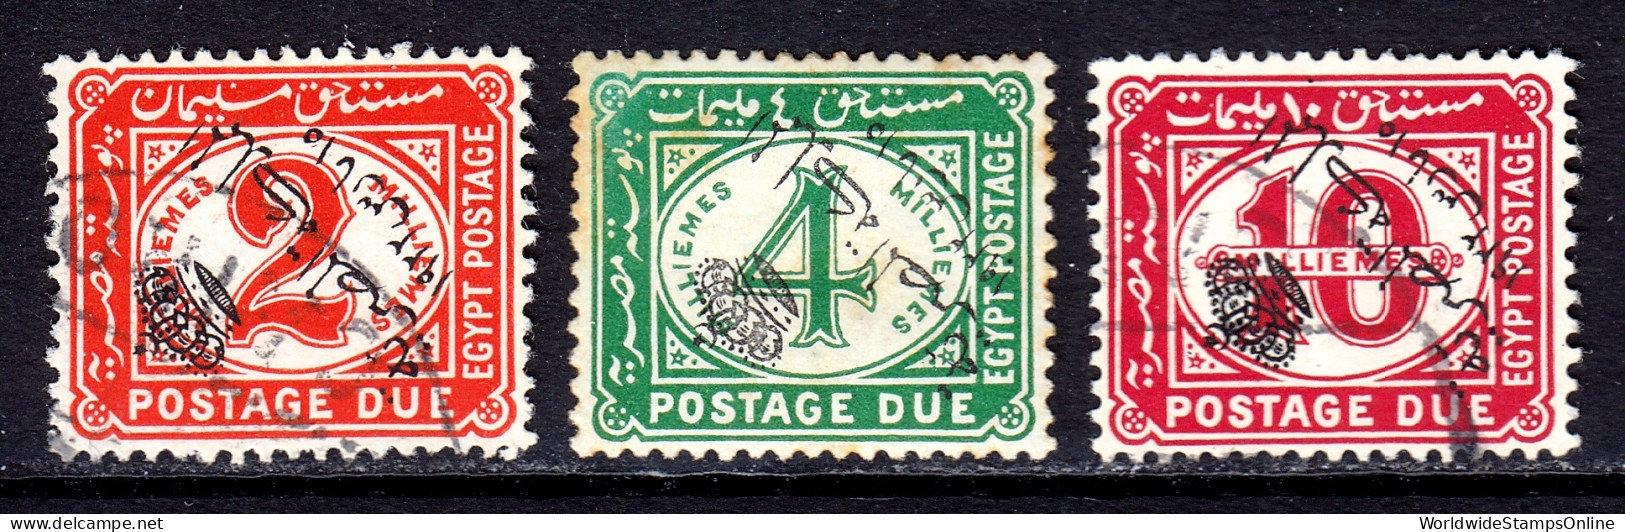 Egypt - Scott #J27//J29 - Used/MH - #J28 Is MH With Toning Spots - SCV $6.50 - Usados